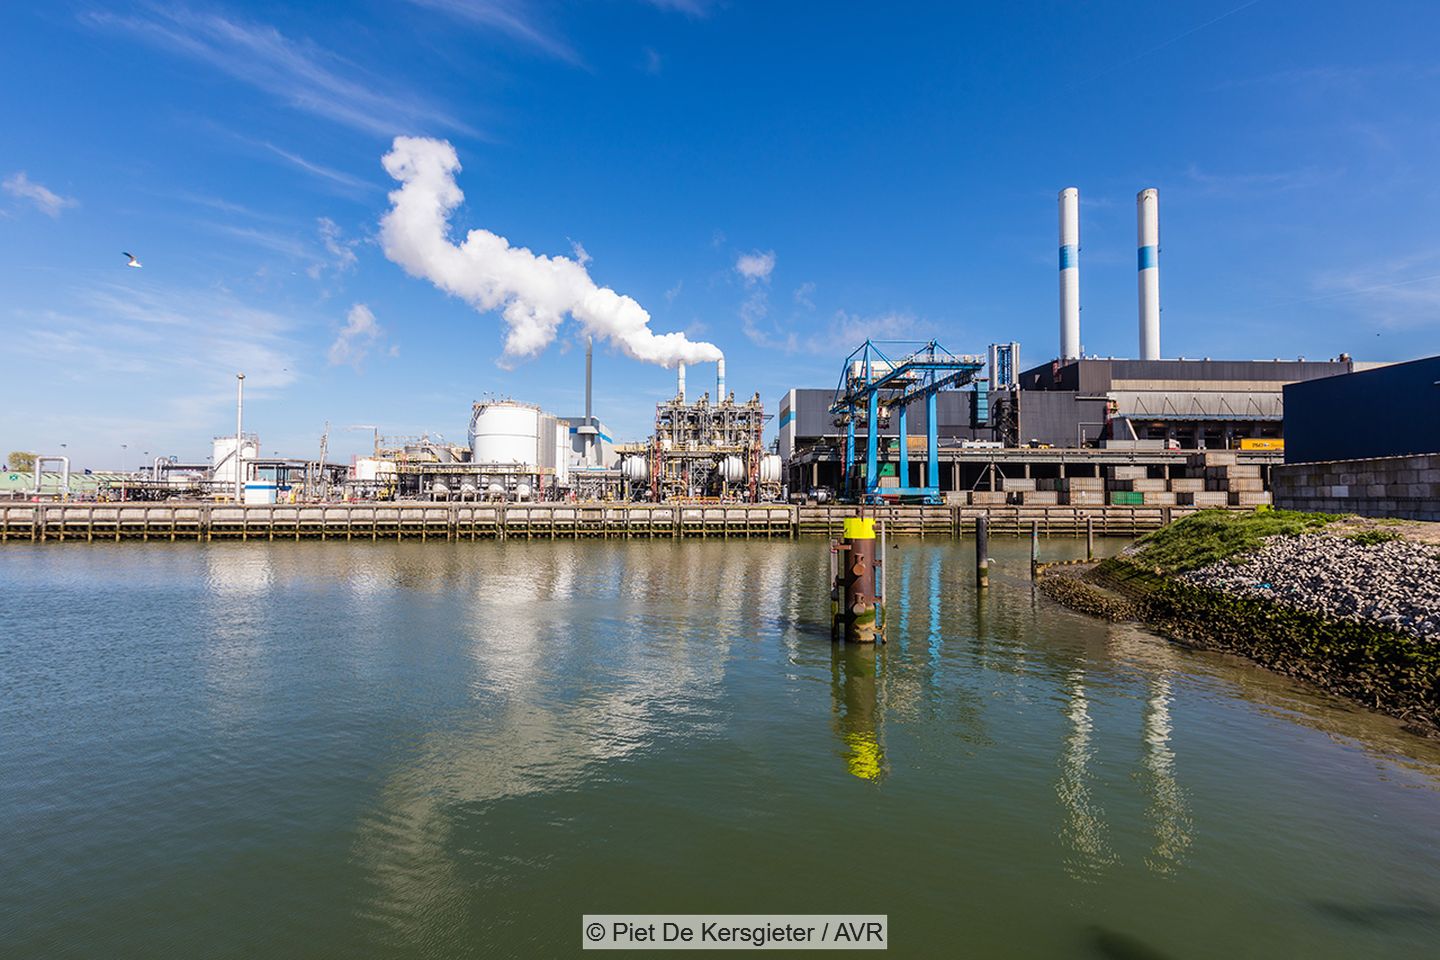 View of AVR's Rozenburg waste incineration plant in the port area of Rotterdam